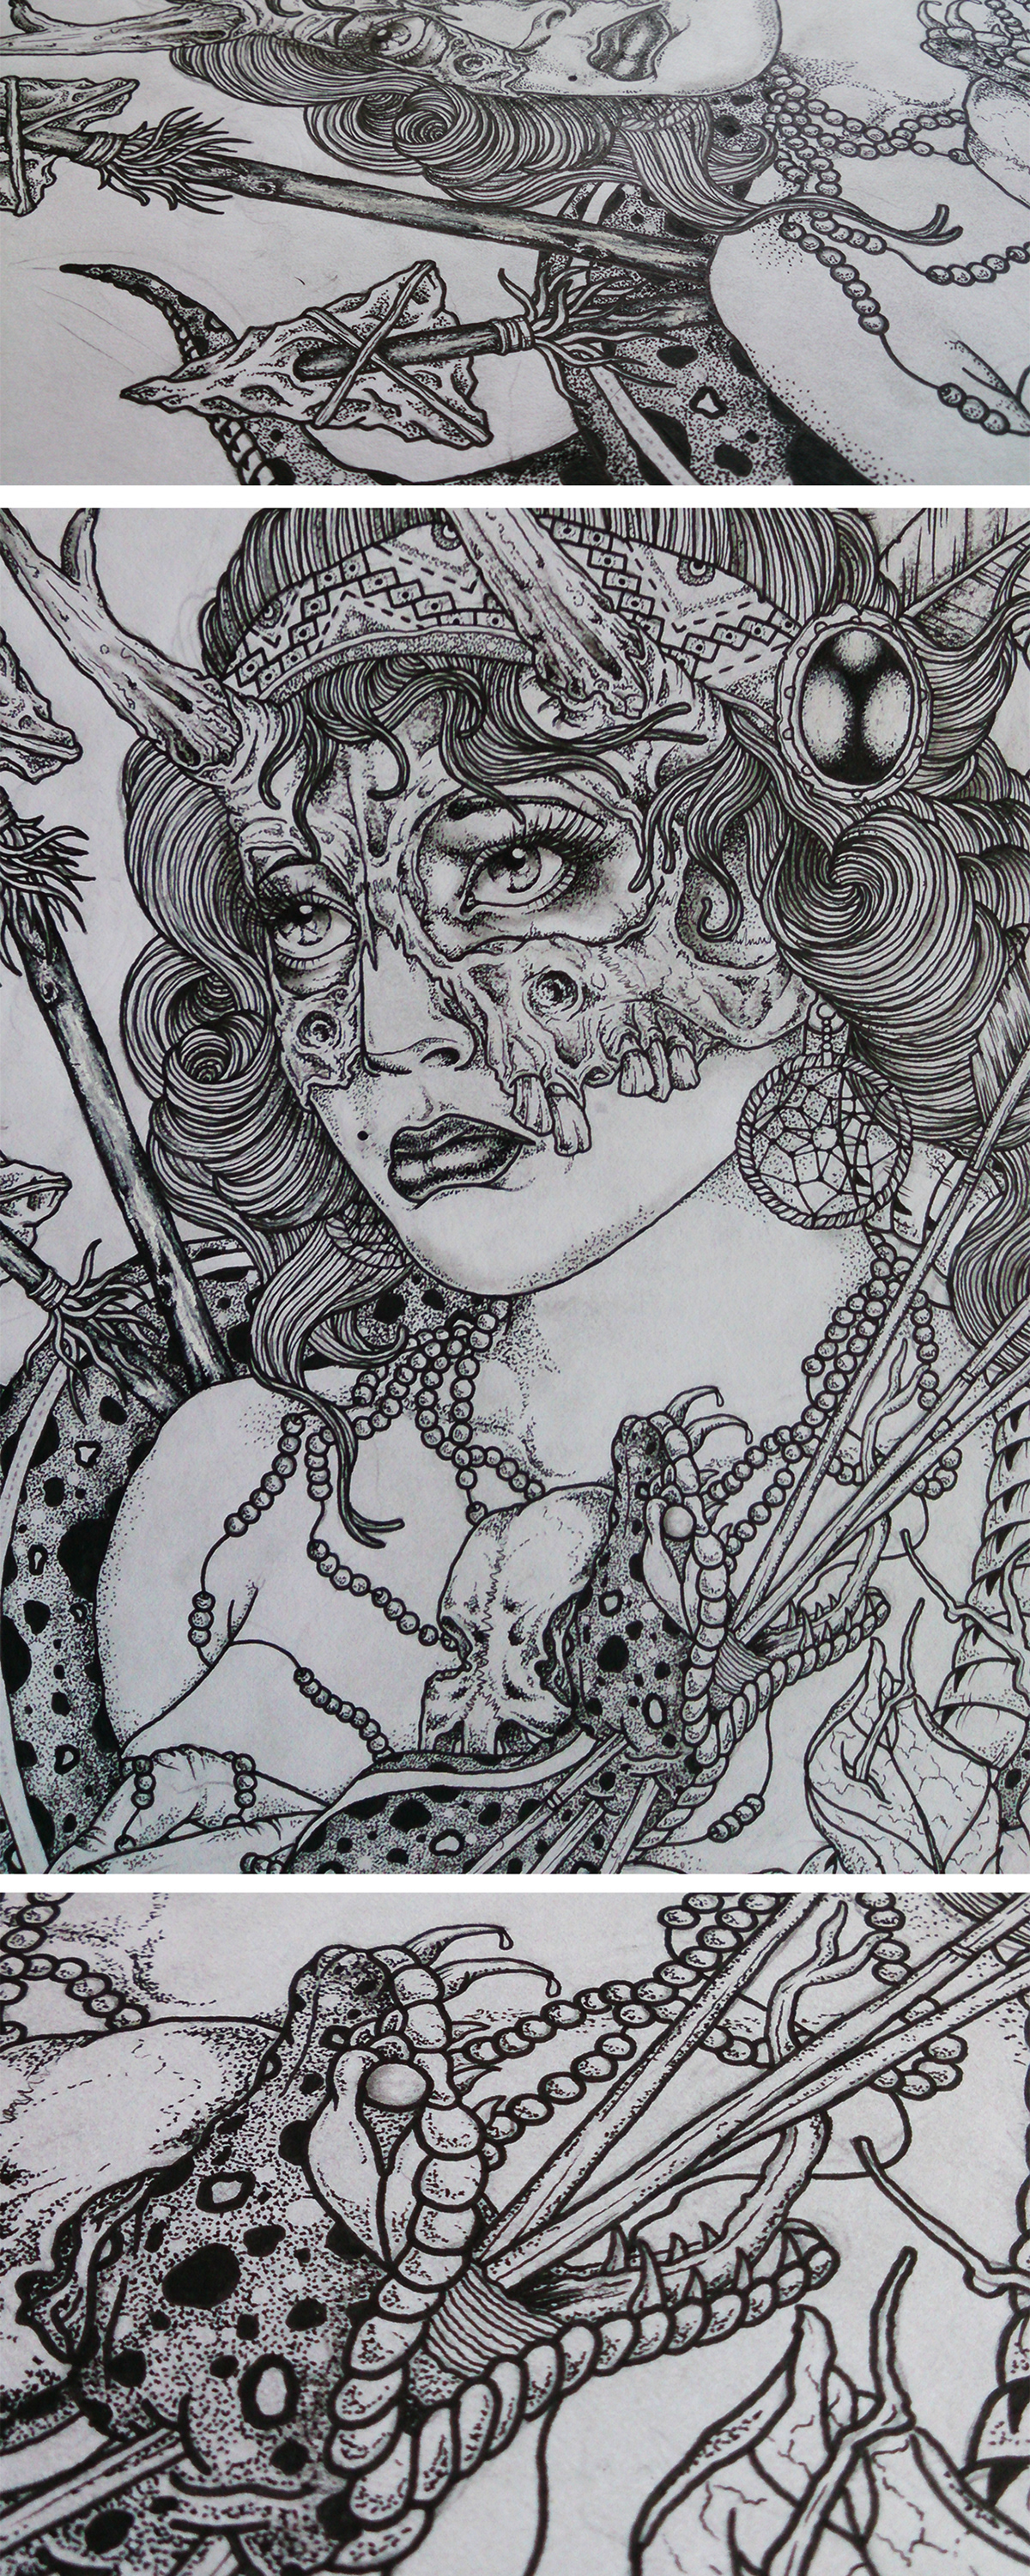 drawn  by hand  ink  pencil  paper  art